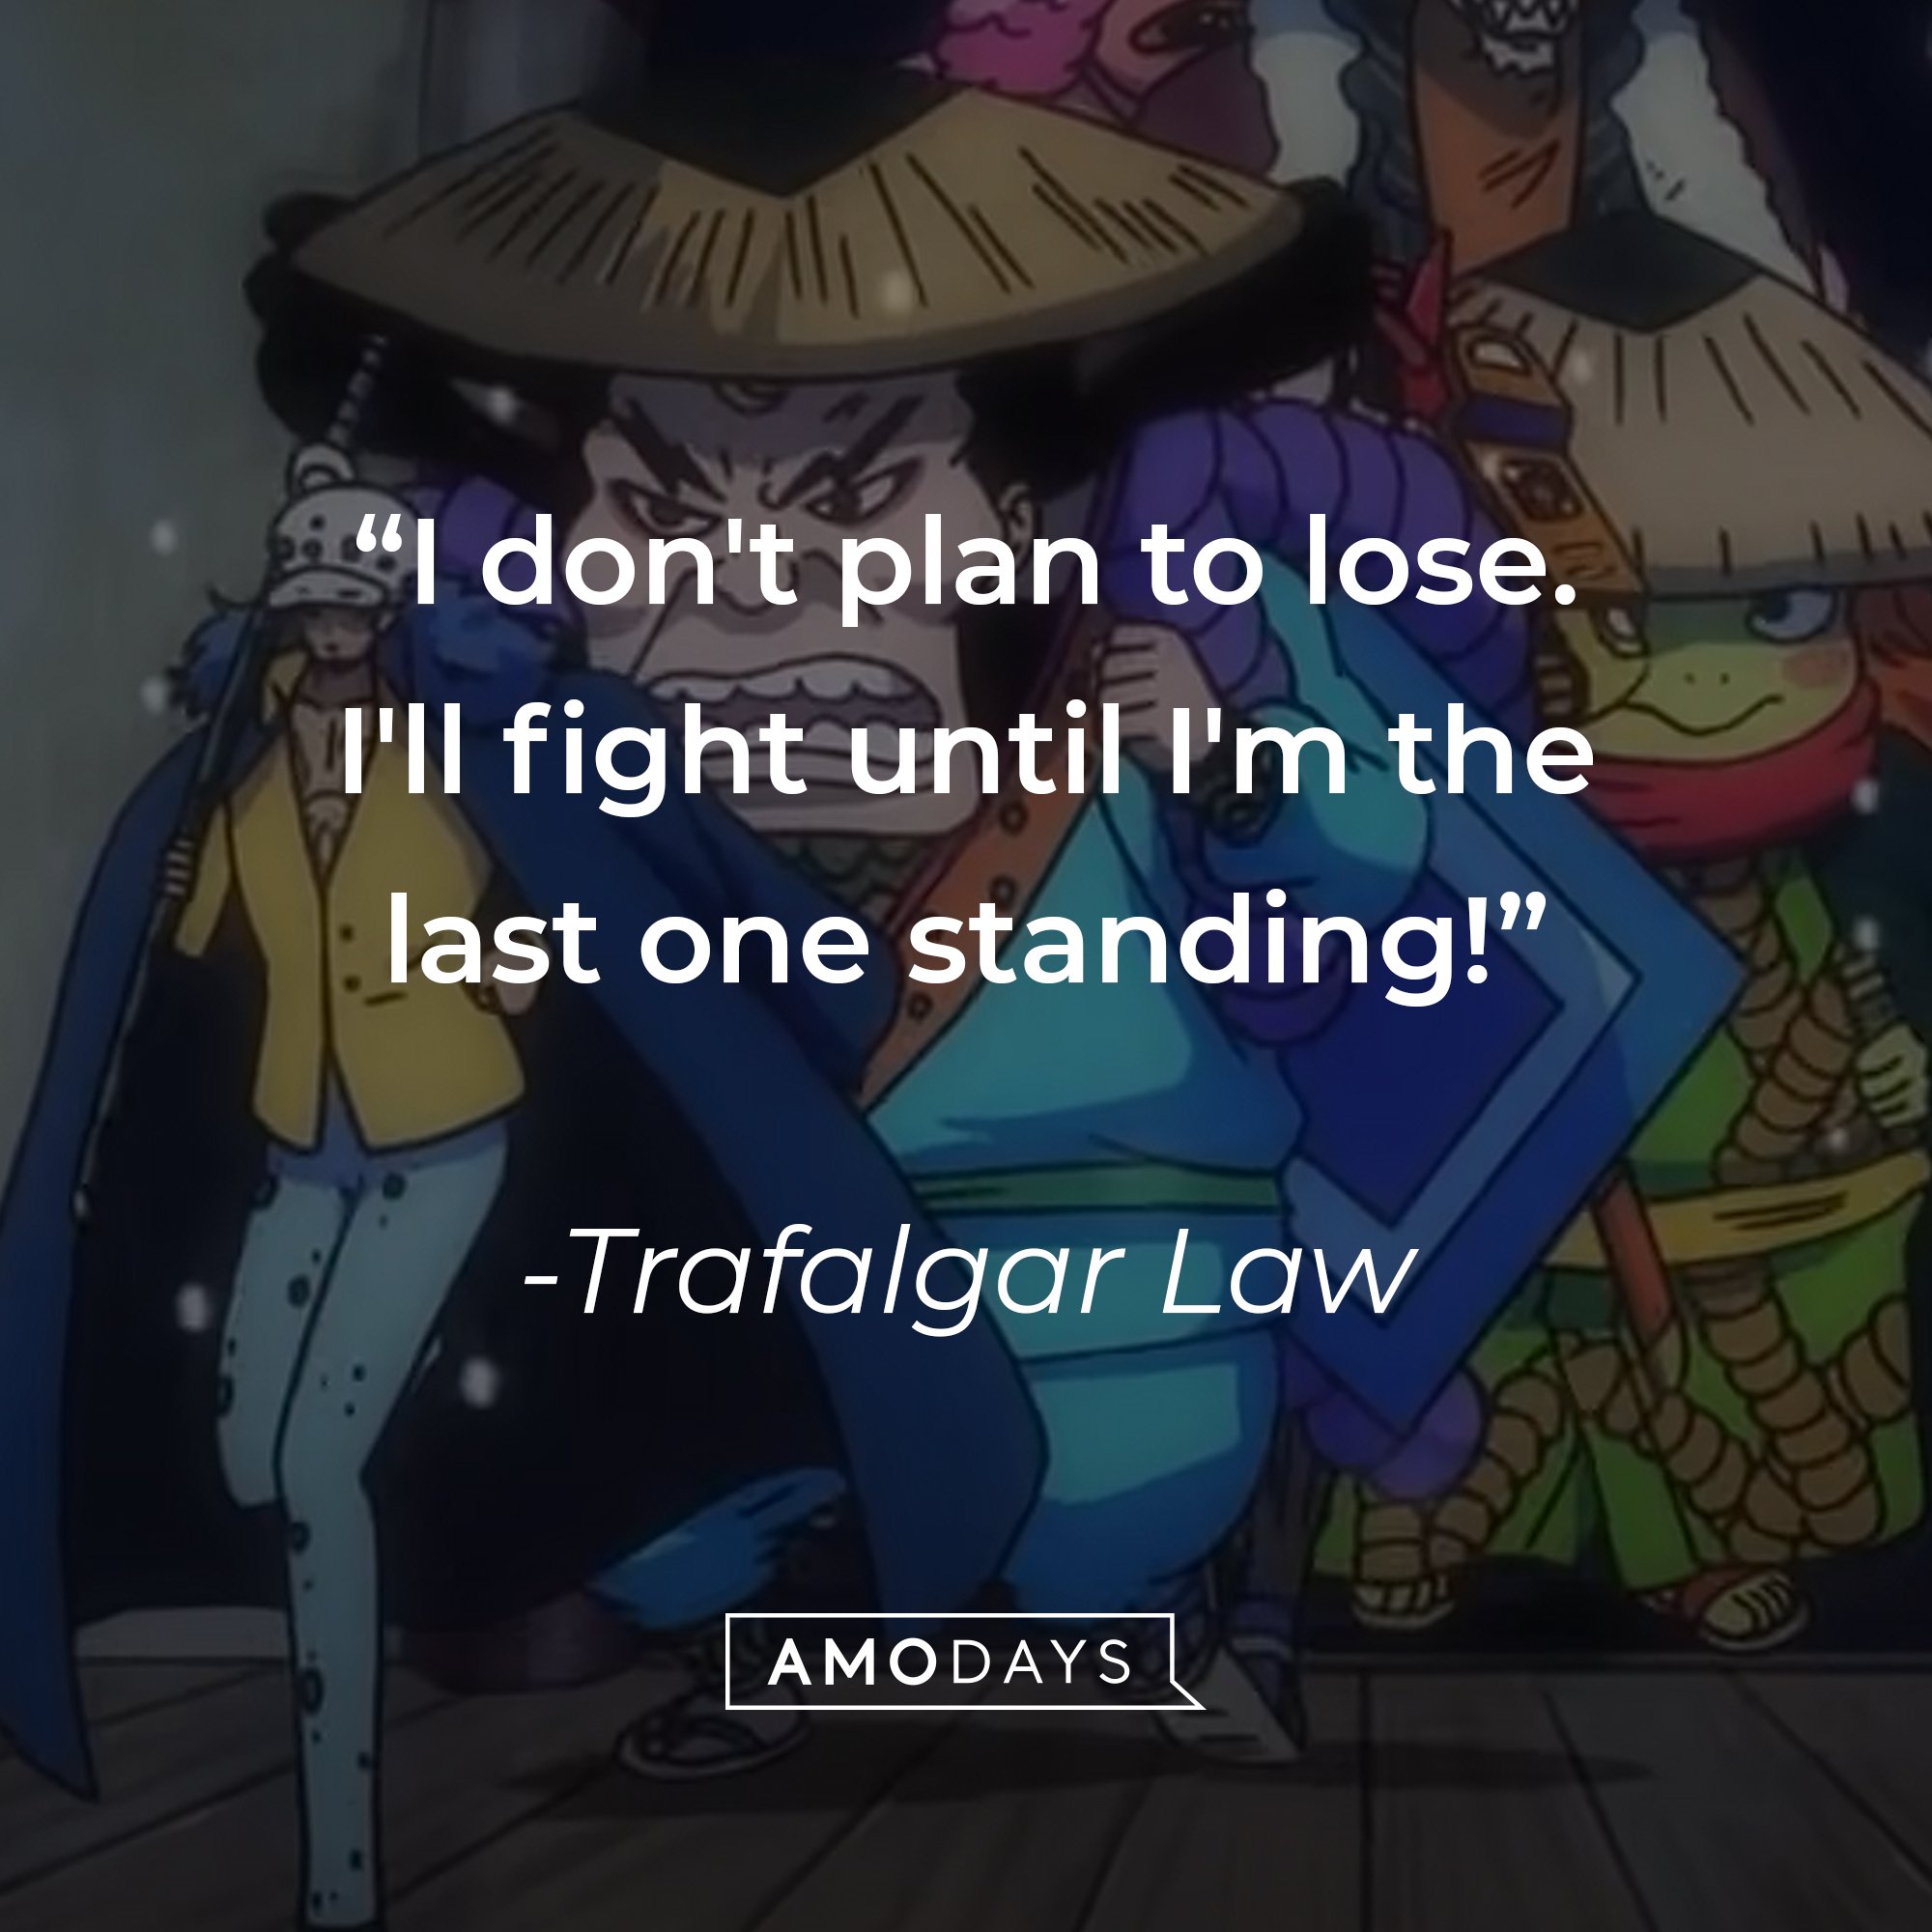 Trafalgar Law’s quote: "I don't plan to lose. I'll fight until I'm the last one standing!" | Image: AmoDays